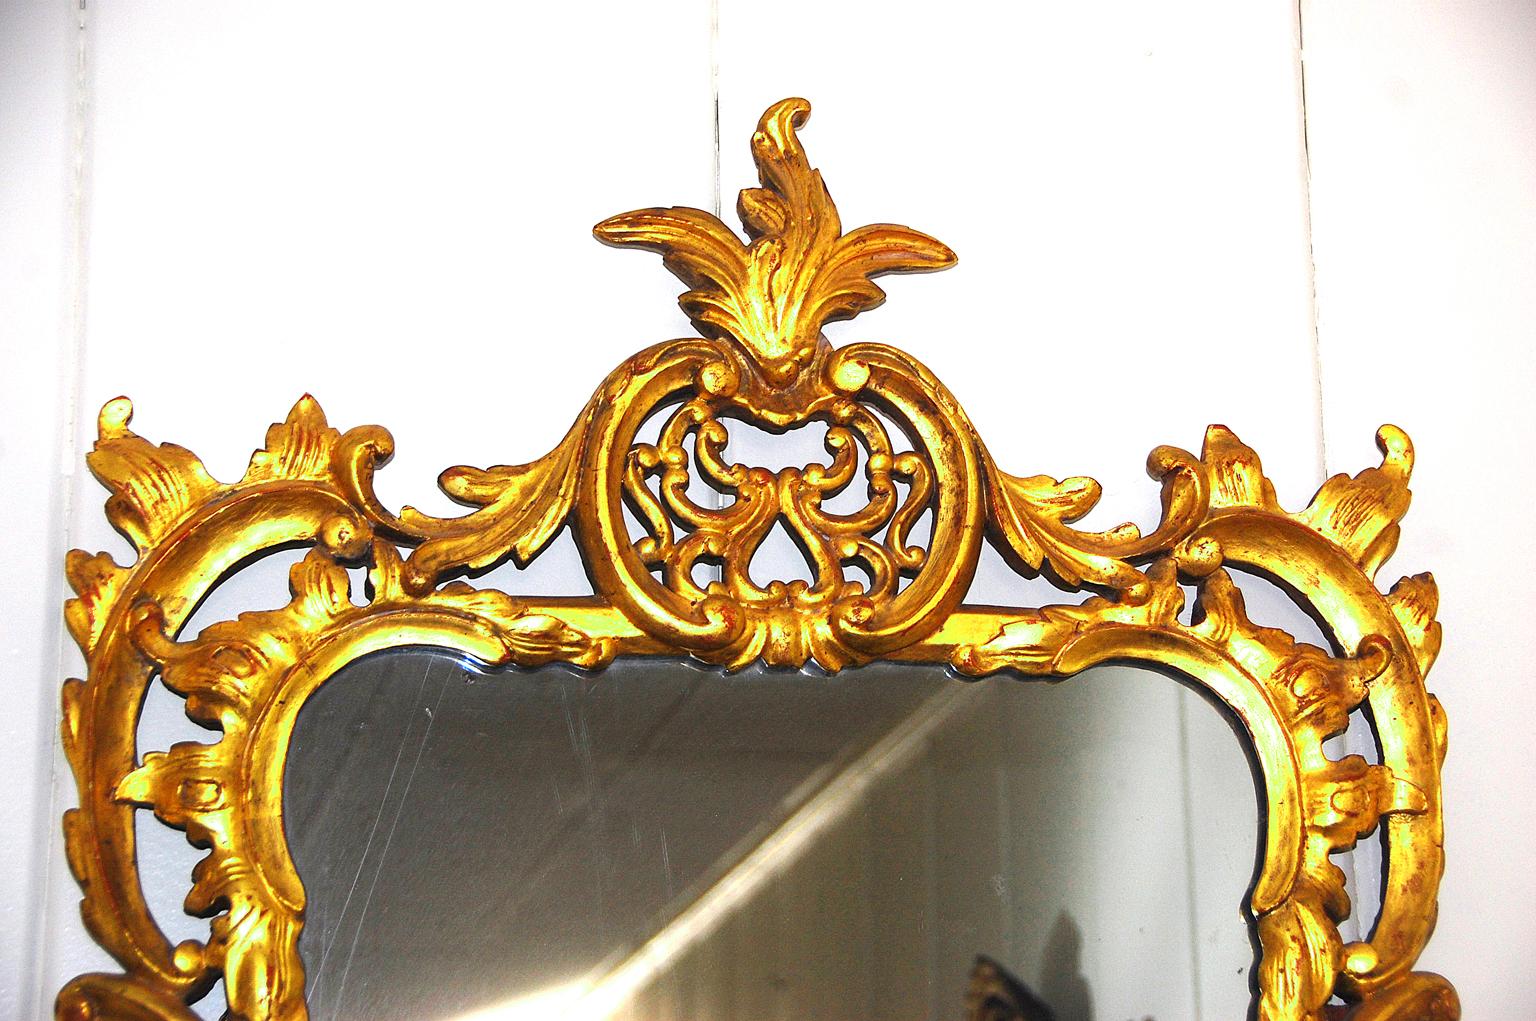 English George III period gold leaf carved mirror with foliage and flower motifs, elegant piercing and flow around the mirror done by a master carver, circa 1790.